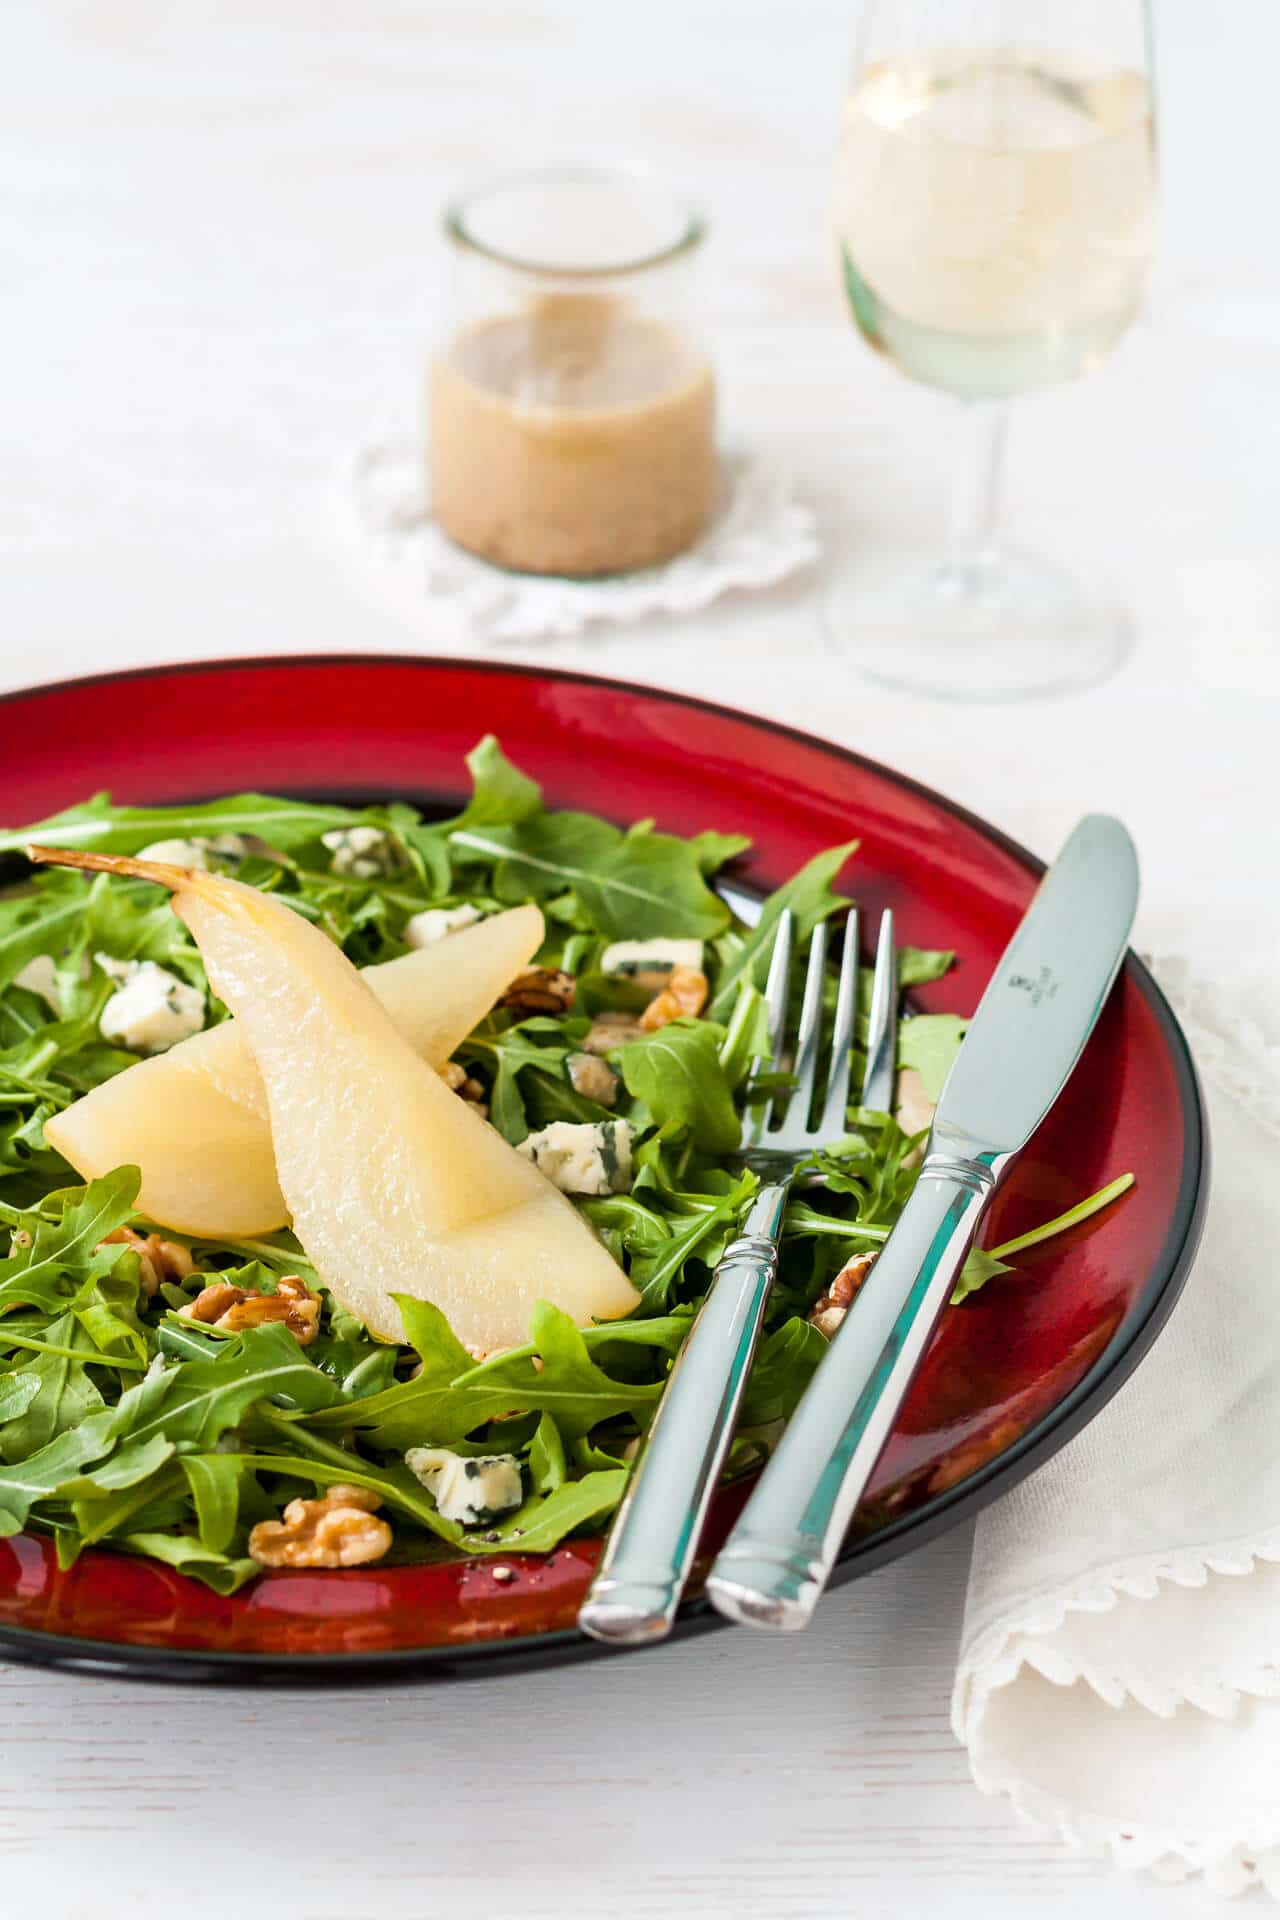 A salad of poached pears on a bed of arugula with blue cheese and walnuts on a red plate.